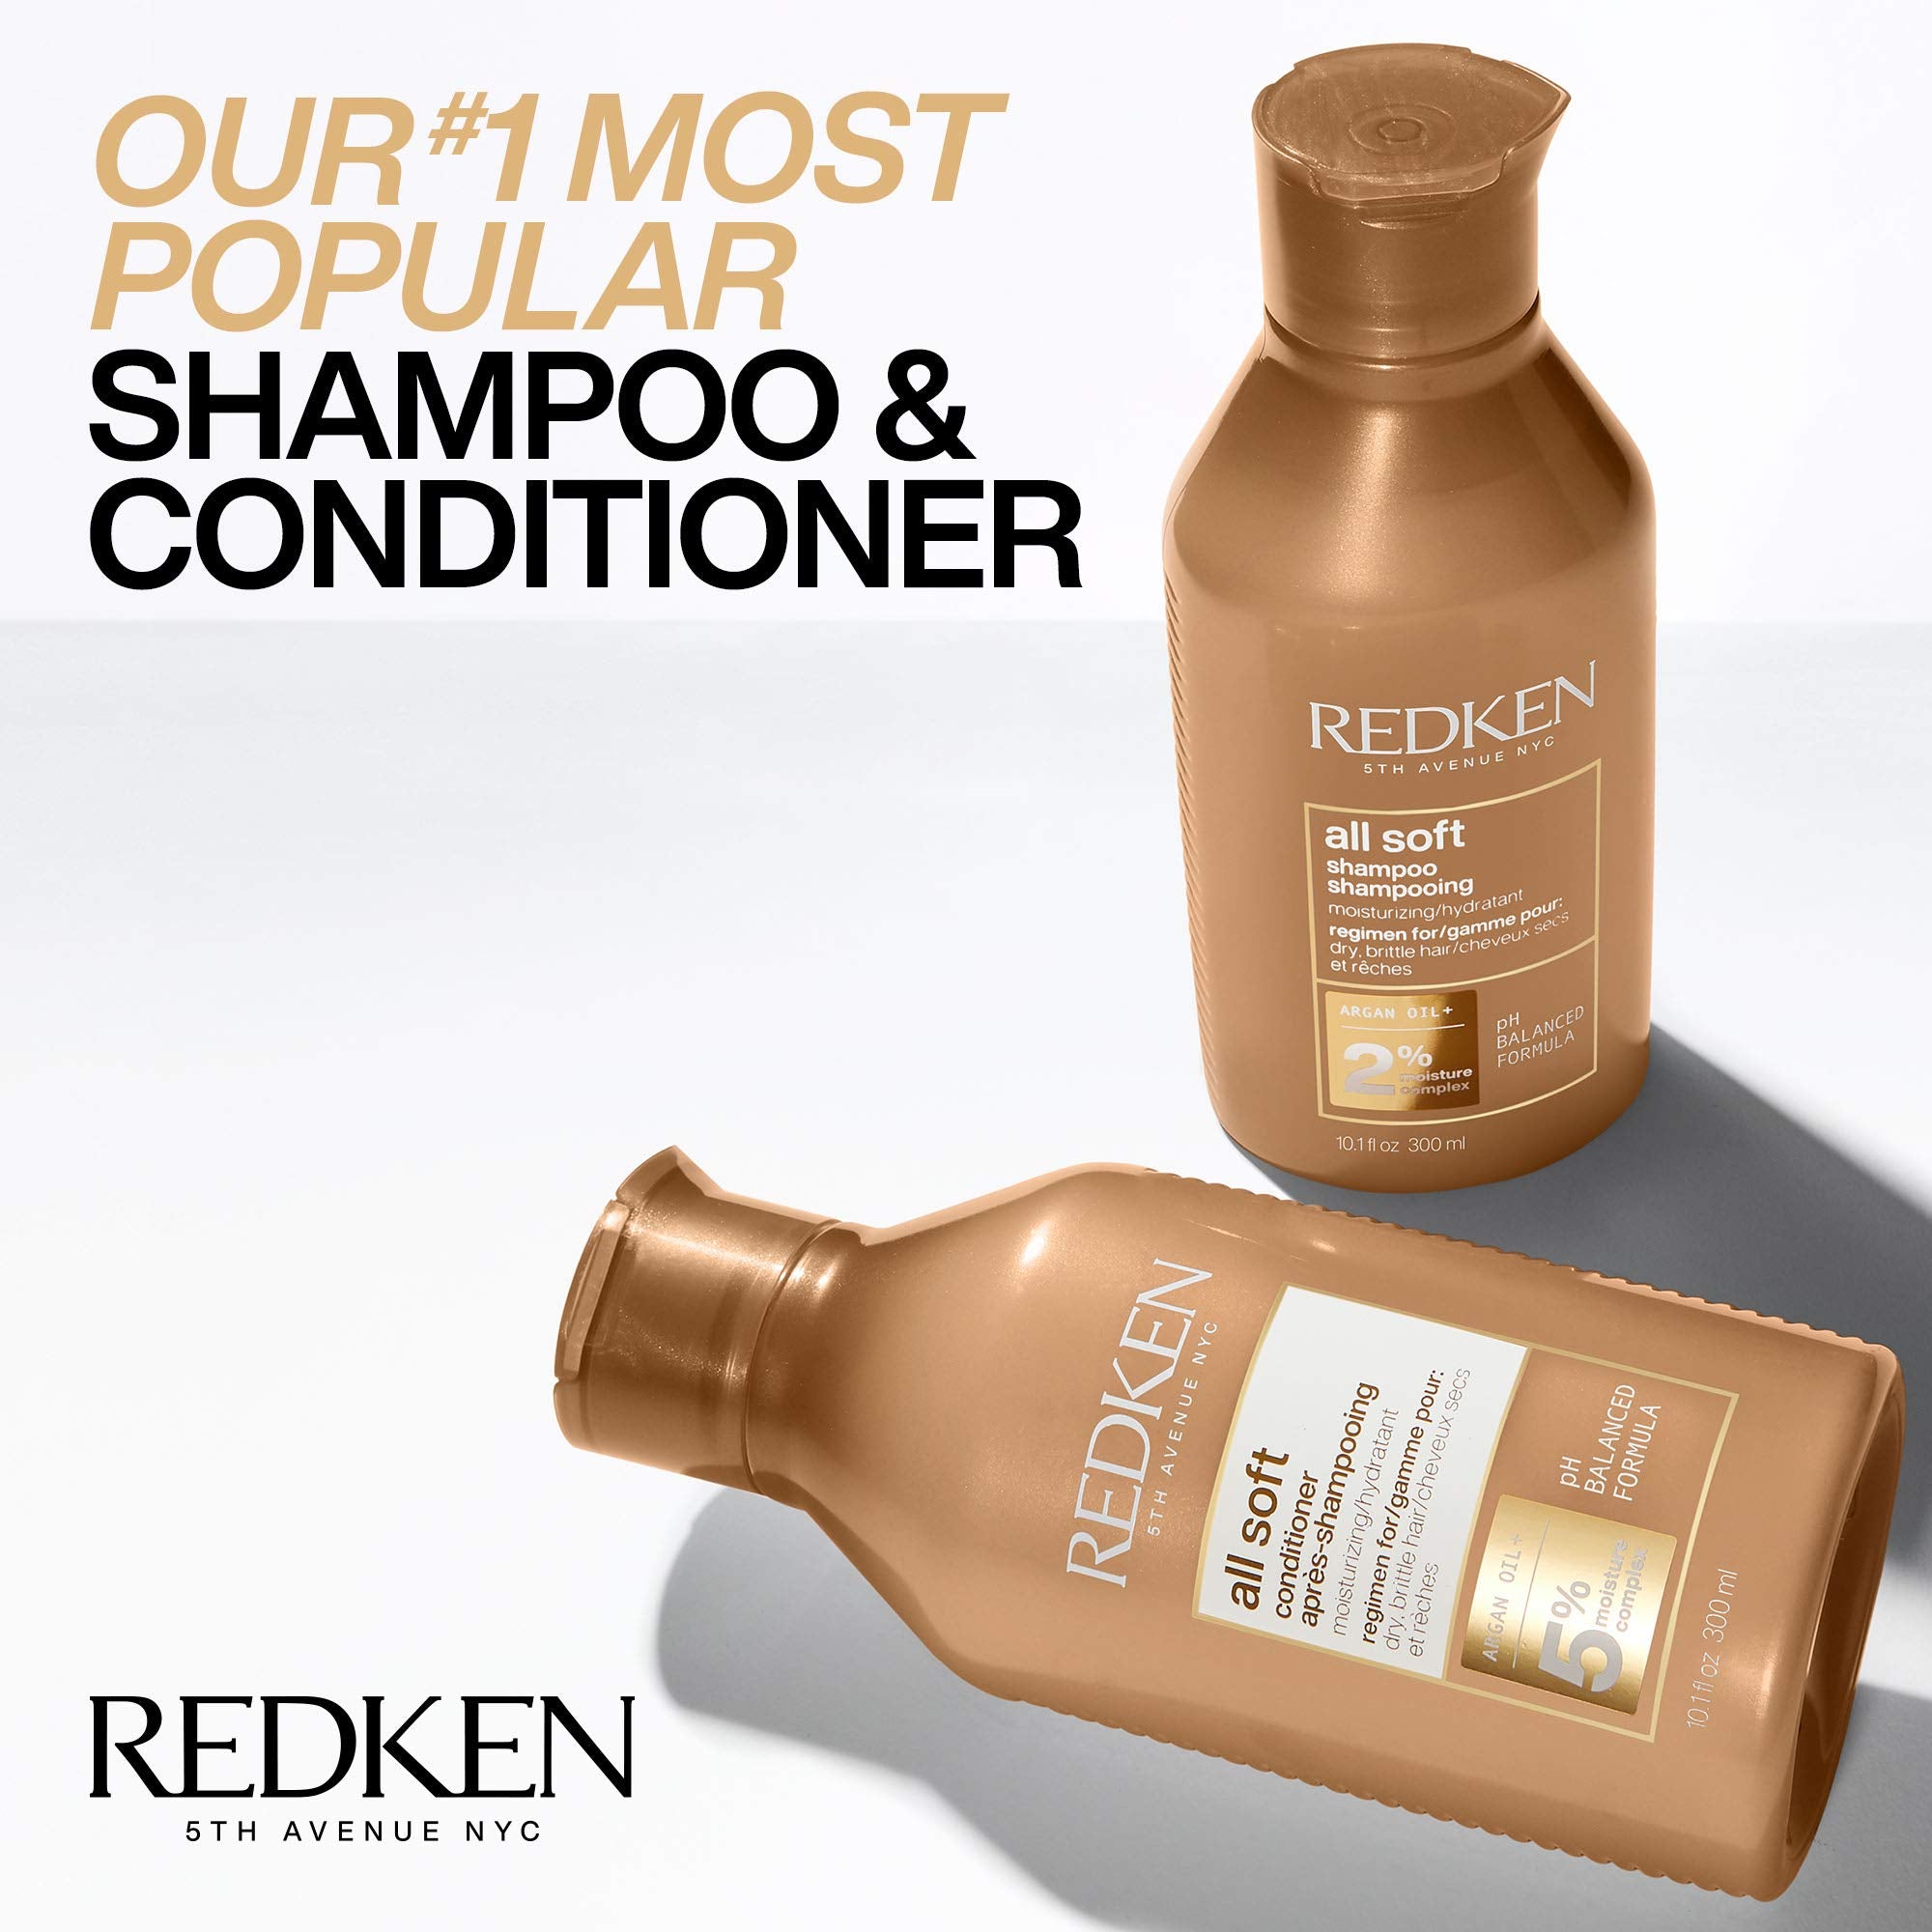 Redken Shampoo, All Soft Shampoo For Dry/Brittle Hair, Shampoo Provides Intense Softness and Shine, Nourishing Shampoo, For All Hair Types, With Argan Oil, 300 ML